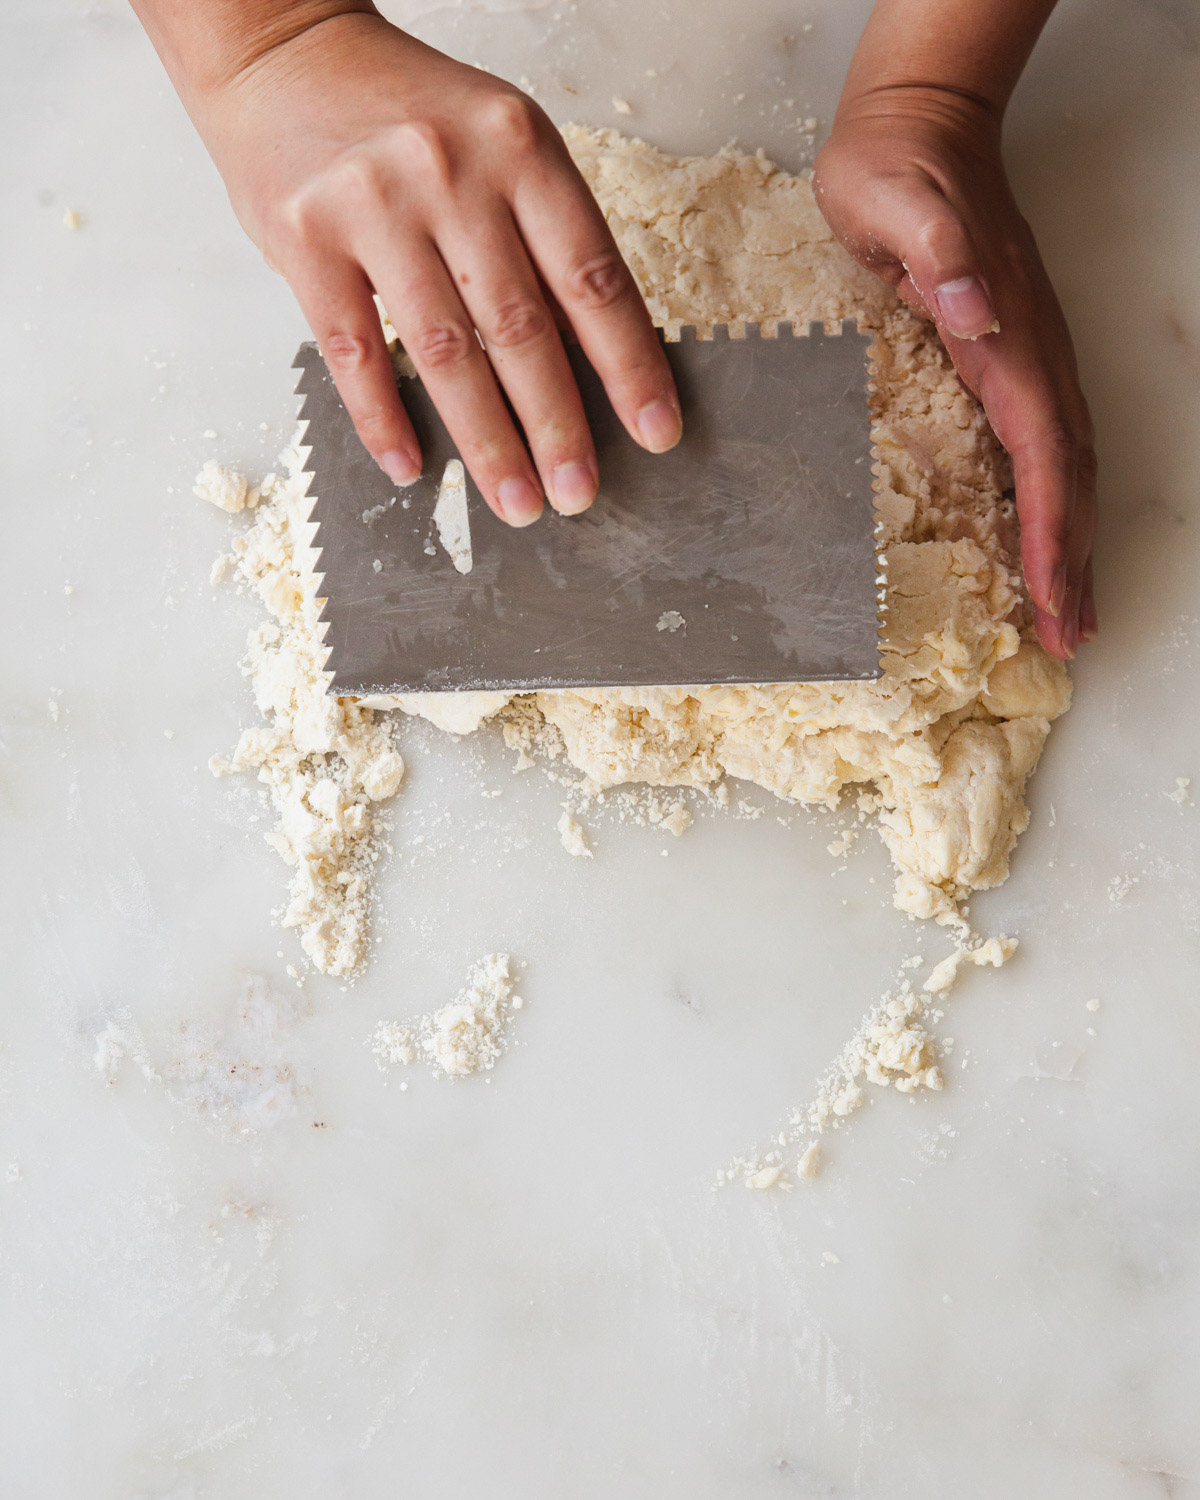 folding pie dough by hand and a bench scraper